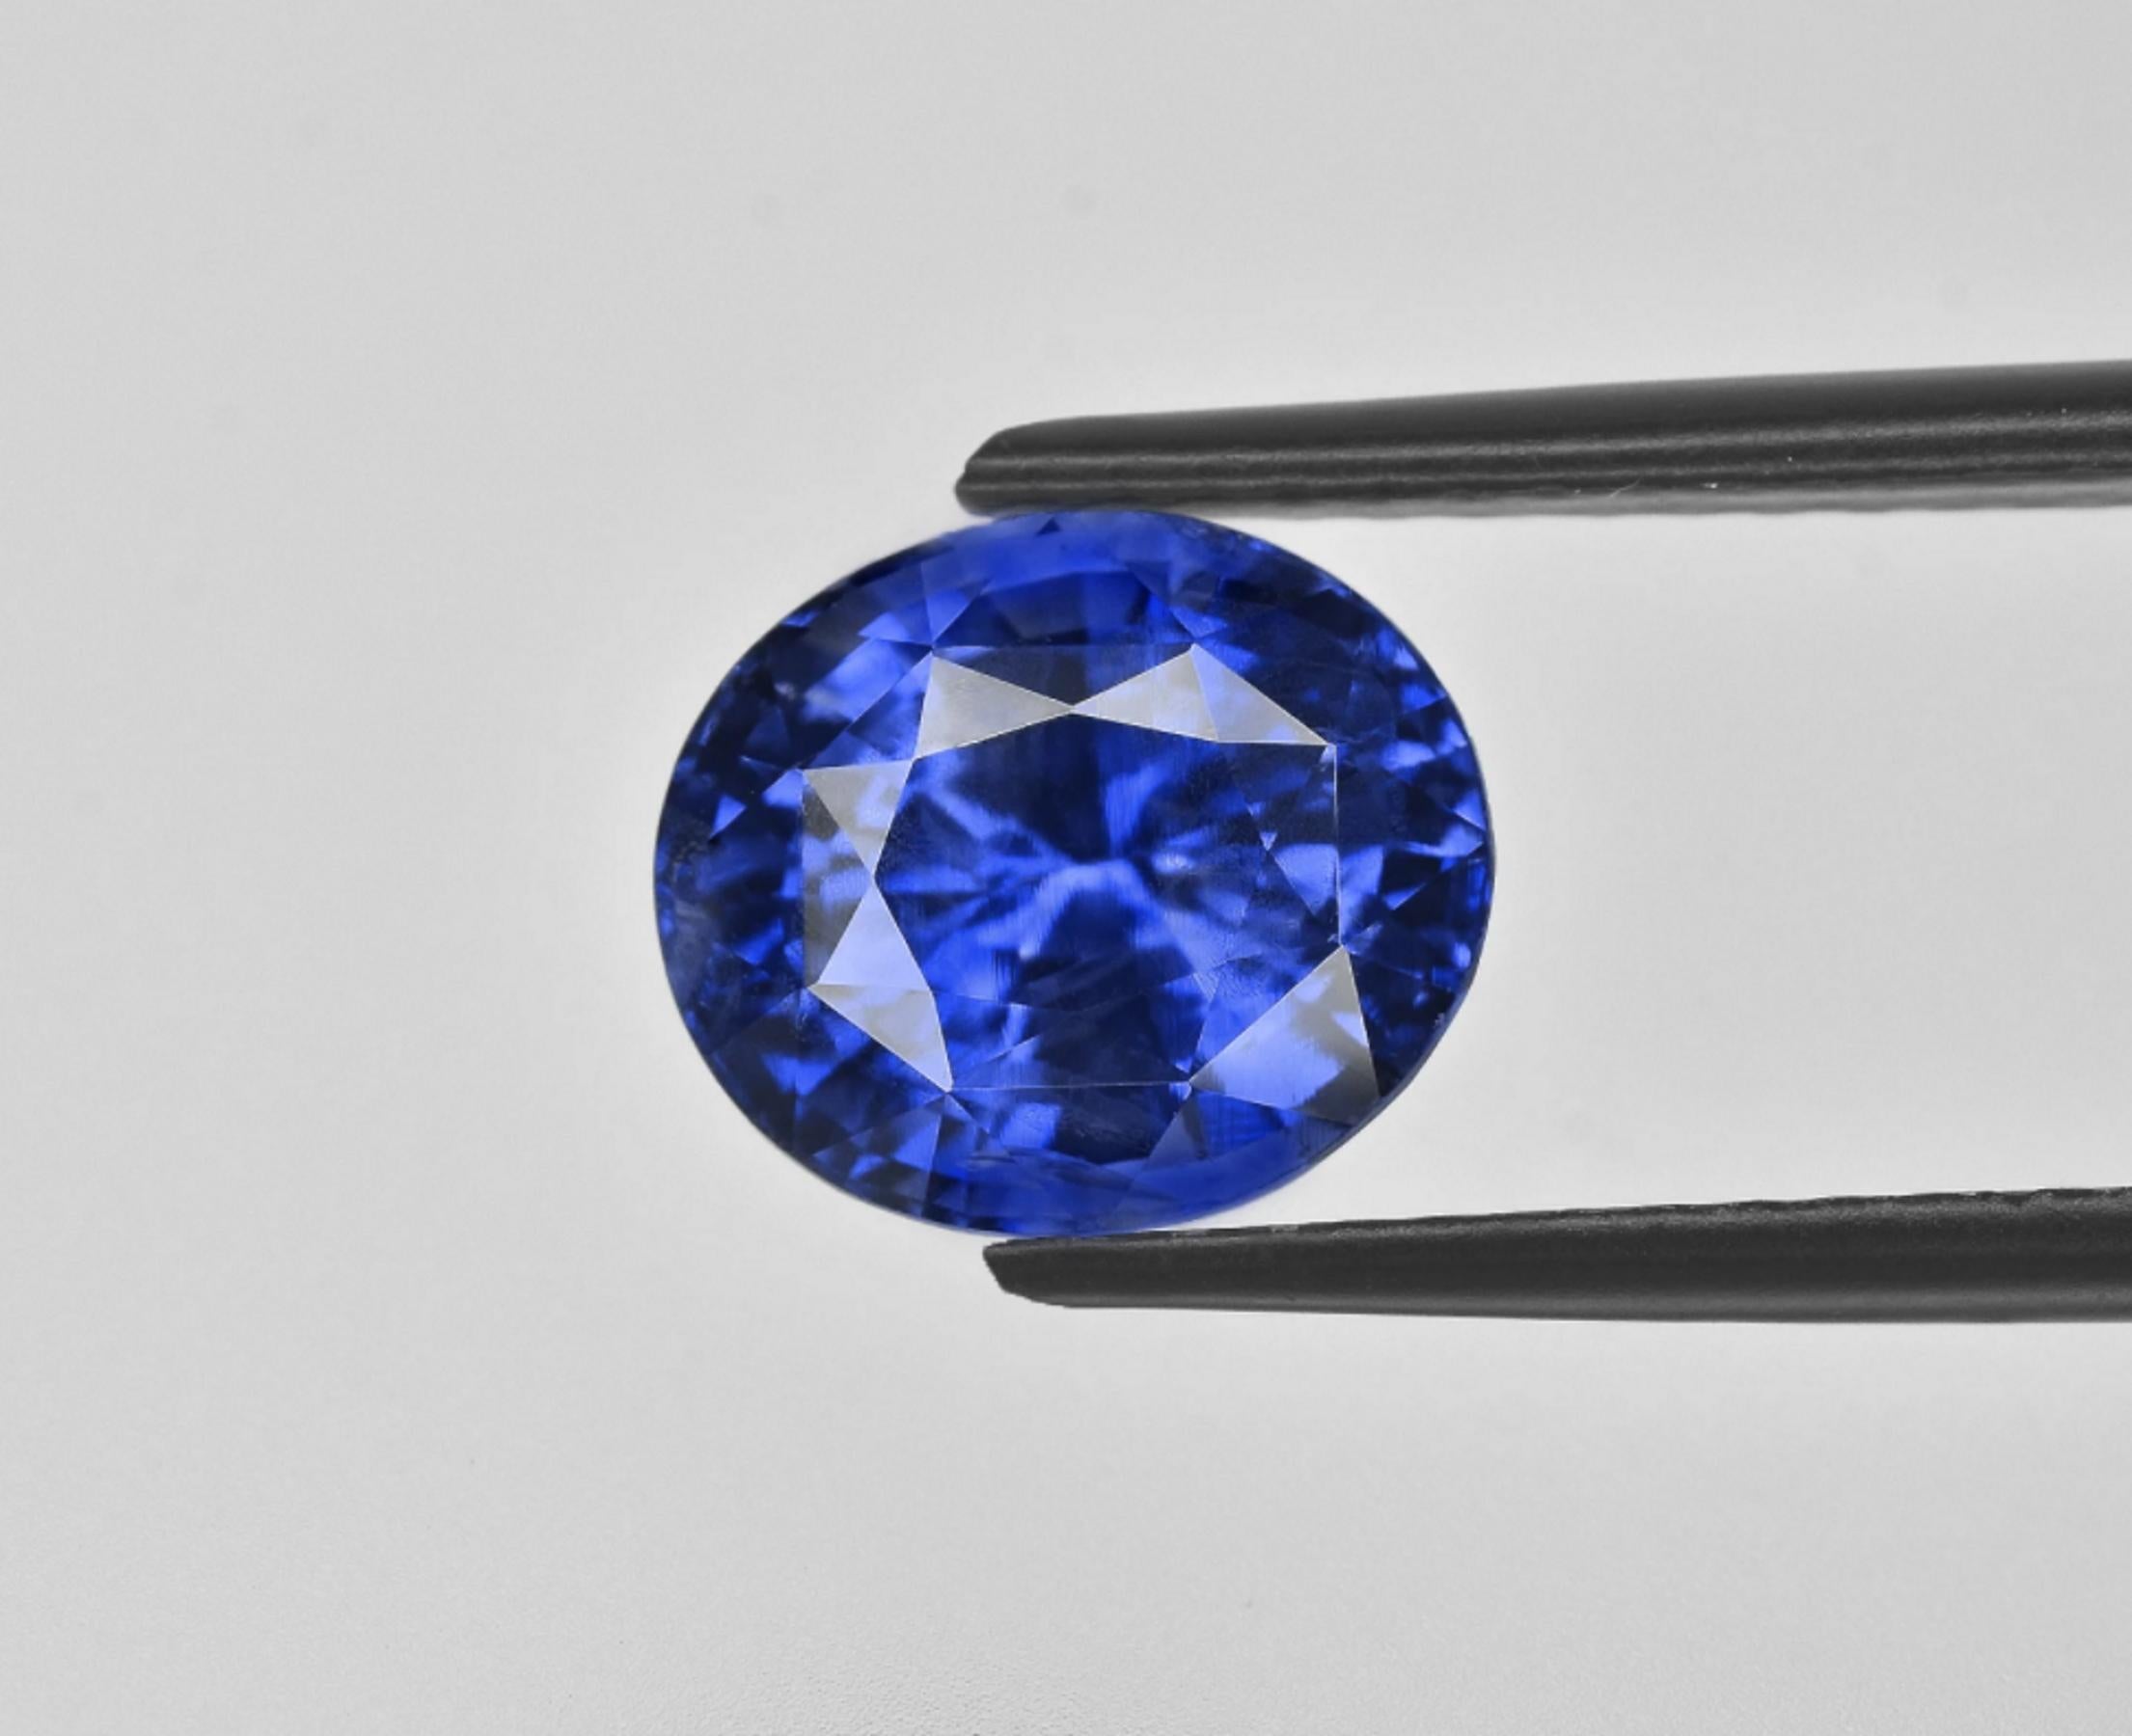 EXCEPTIONAL VIVID BLUE ROYAL BLUE GRS GIA Certified 5.30 Carat Blue Sapphire Ring.

The ring is 100% customazible and resizable

the main stone is very special being described as 